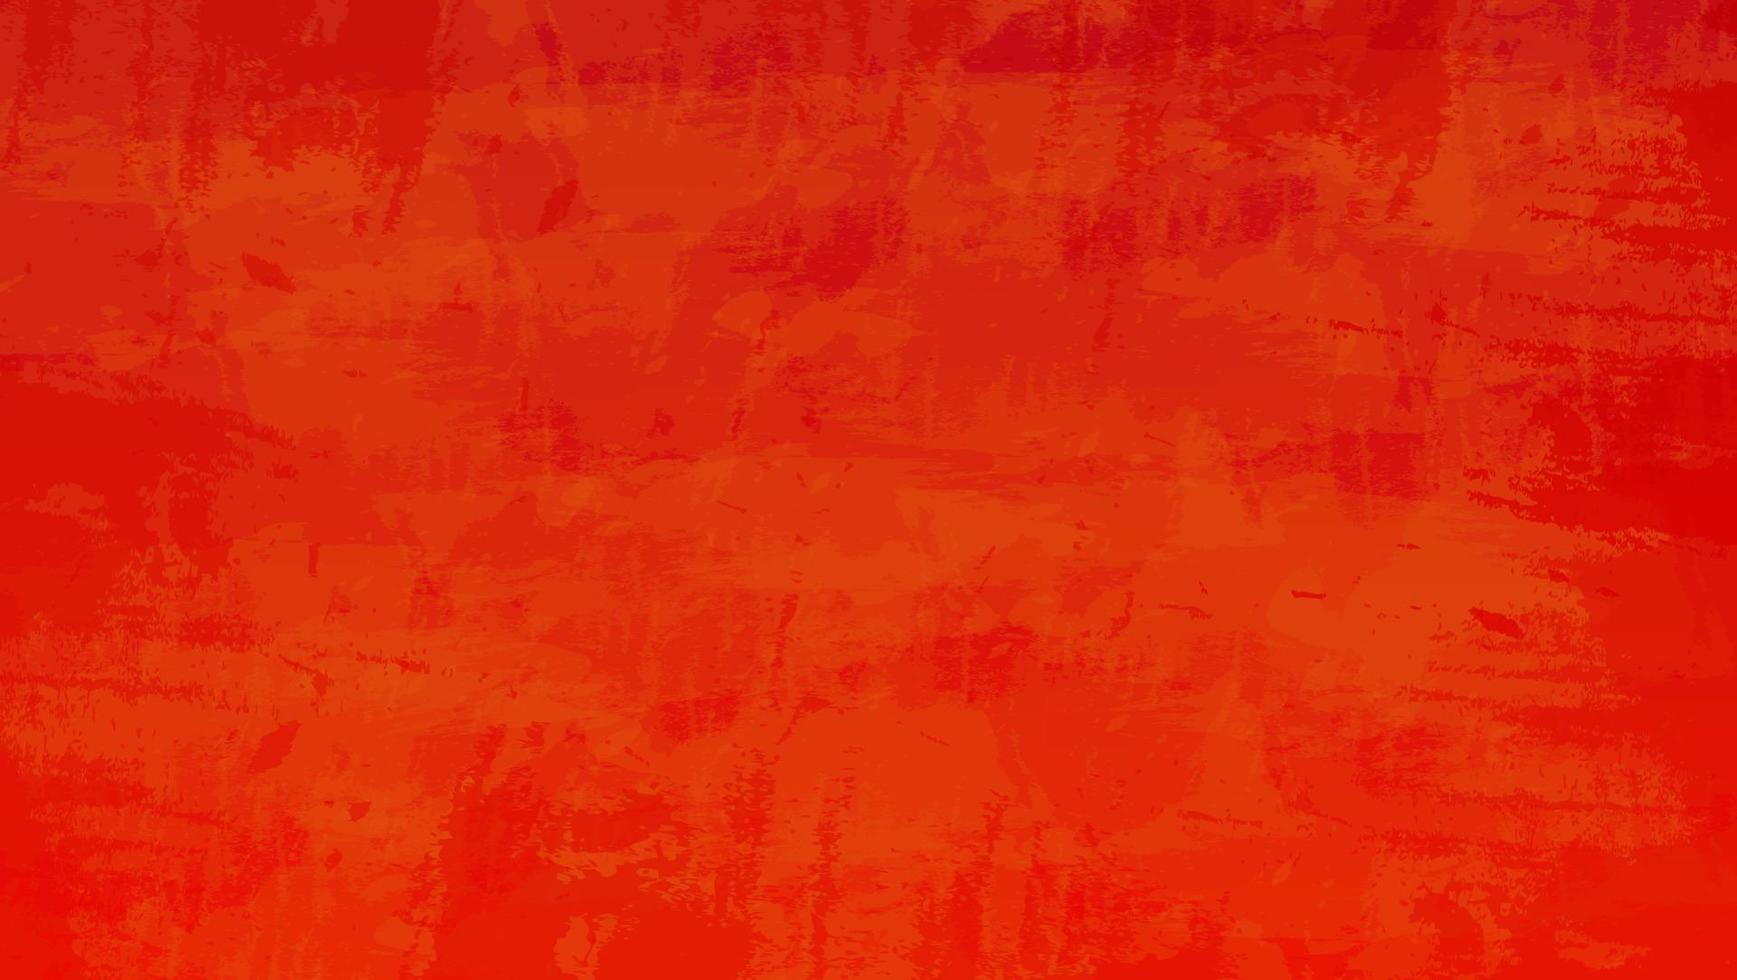 Blank Abstract Bright Red Orange Grunge Watercolor Texture Background Design vector